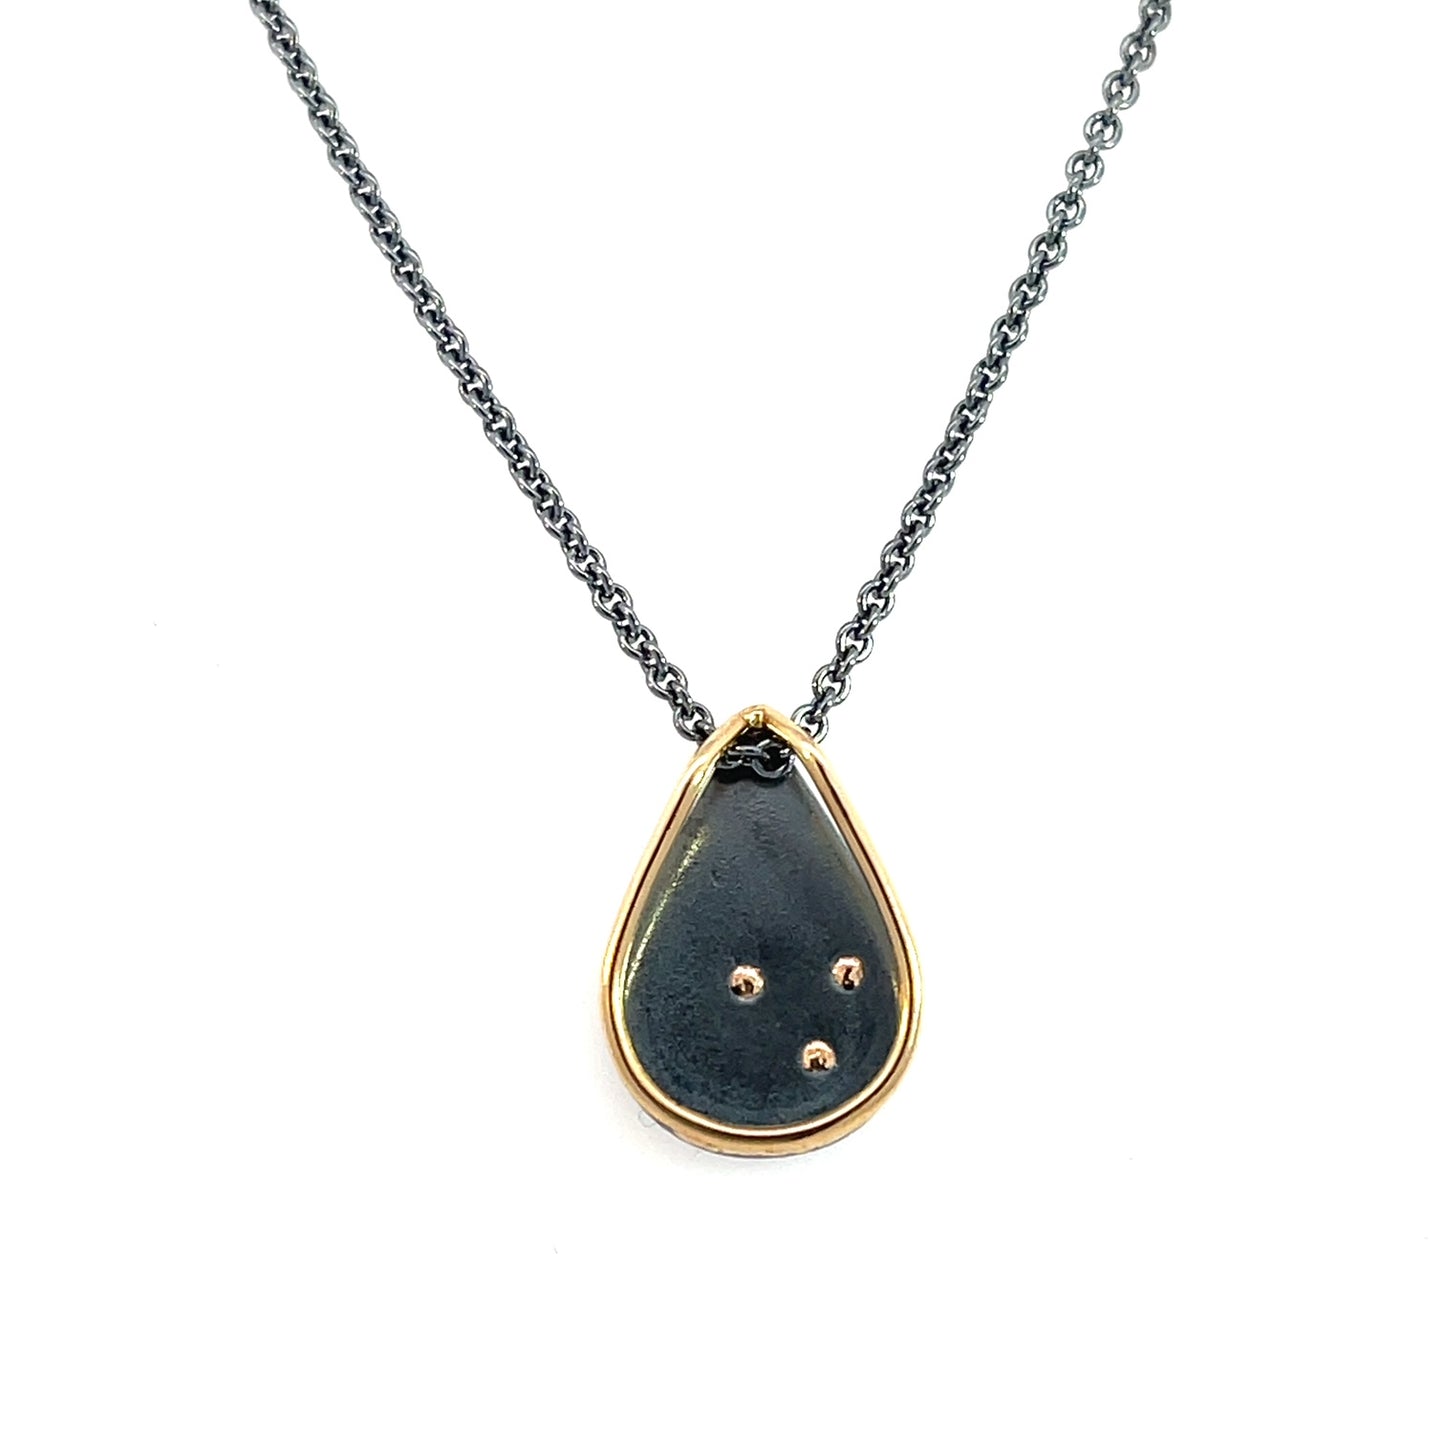 14k Yellow Gold and Oxidized Sterling Silver Teardrop Loop Necklace